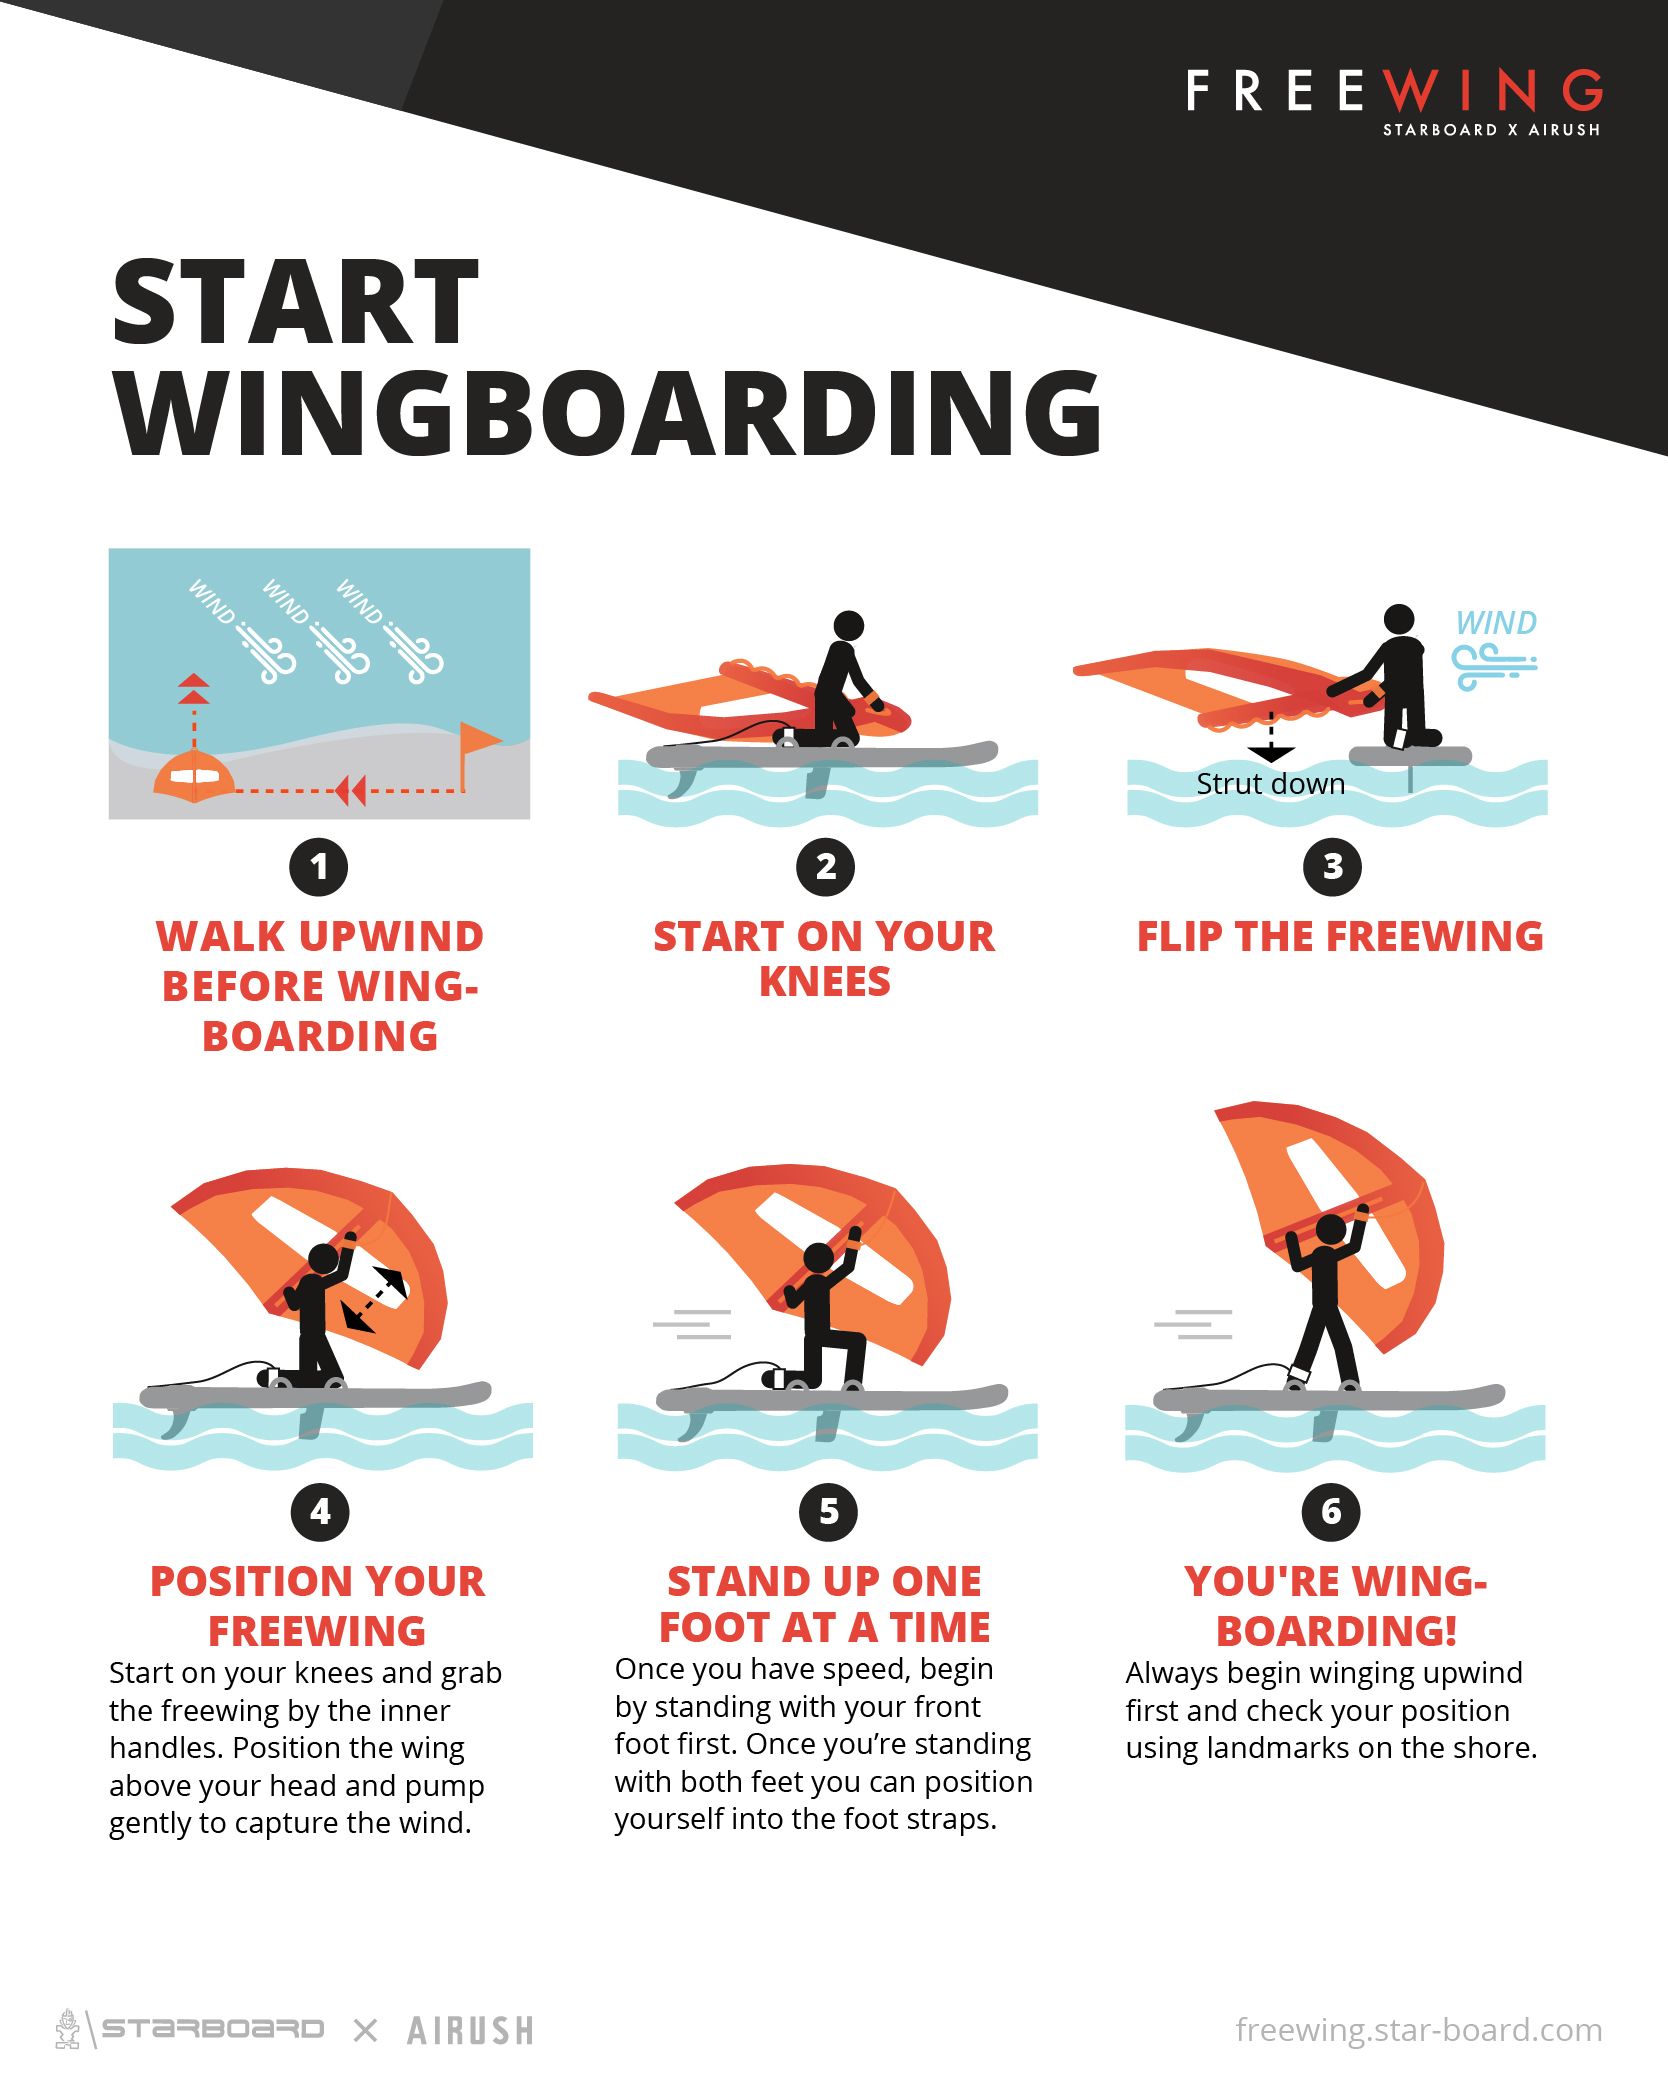 From paddling to flying a beginners guide to SUP Winging for Wind Seekers